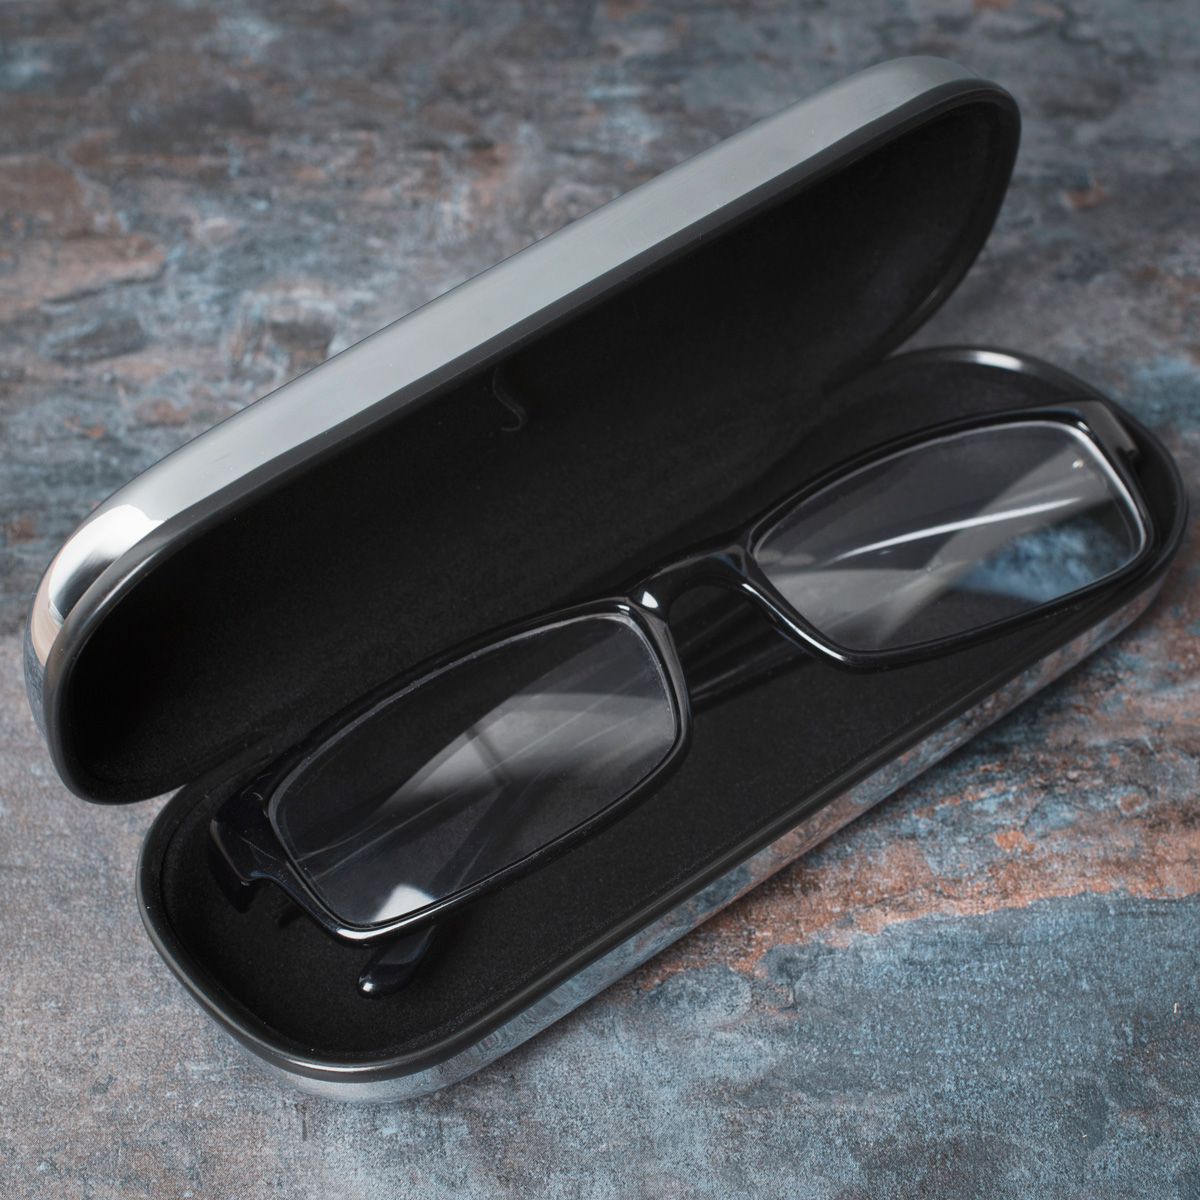 Personalised Glasses Case - Specs, Any Message